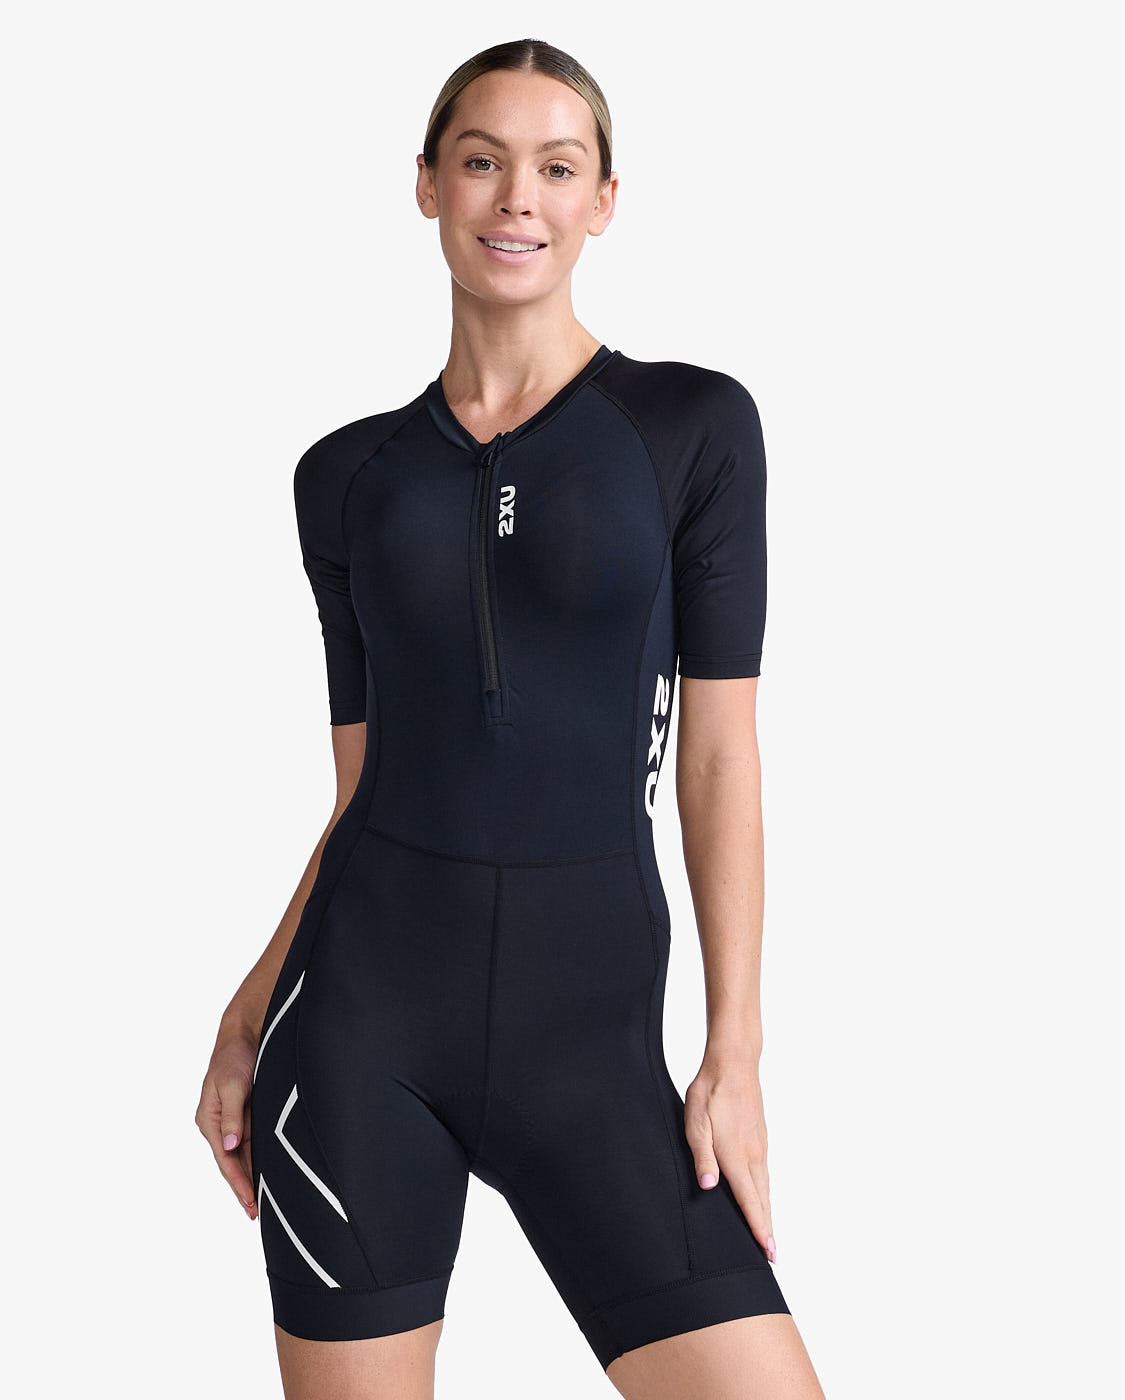 Core Sleeved Trisuit – 2XU